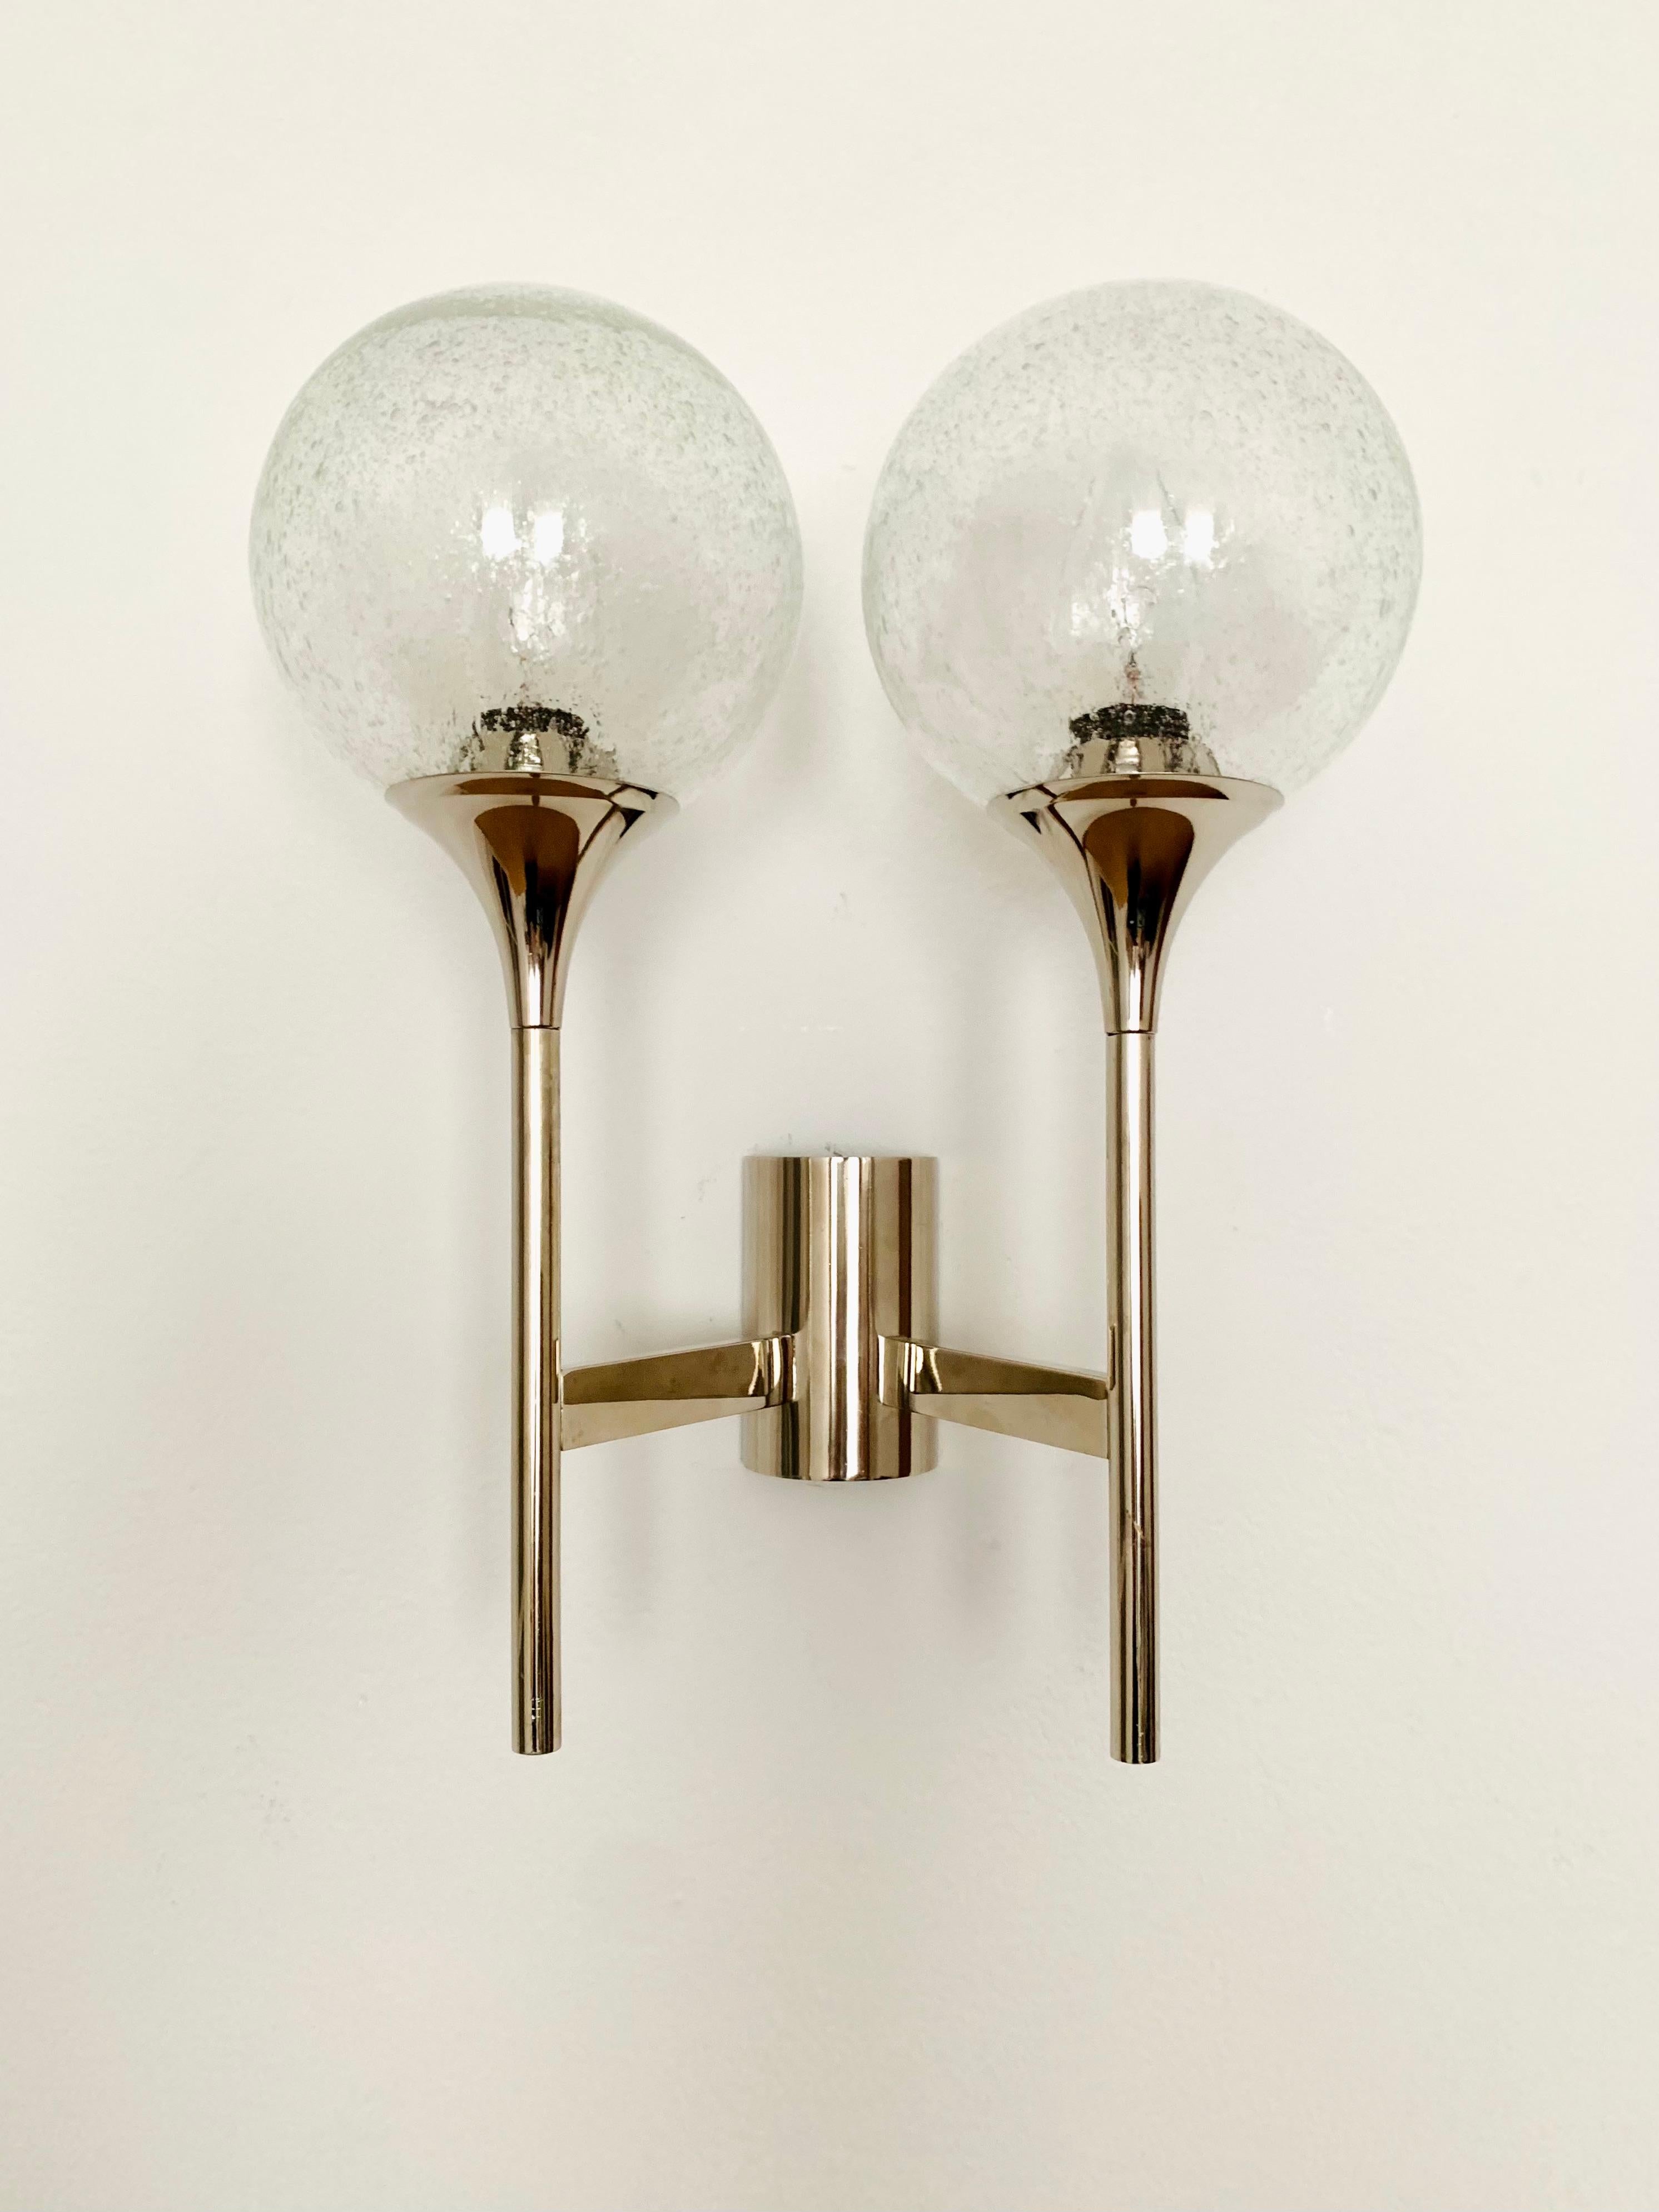 Beautiful Sputnik wall lamp from the 1960s.
The 2 bubble glass lampshades spread a sparkling light.
The lamp has a very high quality finish.
Very contemporary design with a fantastic noble appearance.

Condition:

Very good vintage condition